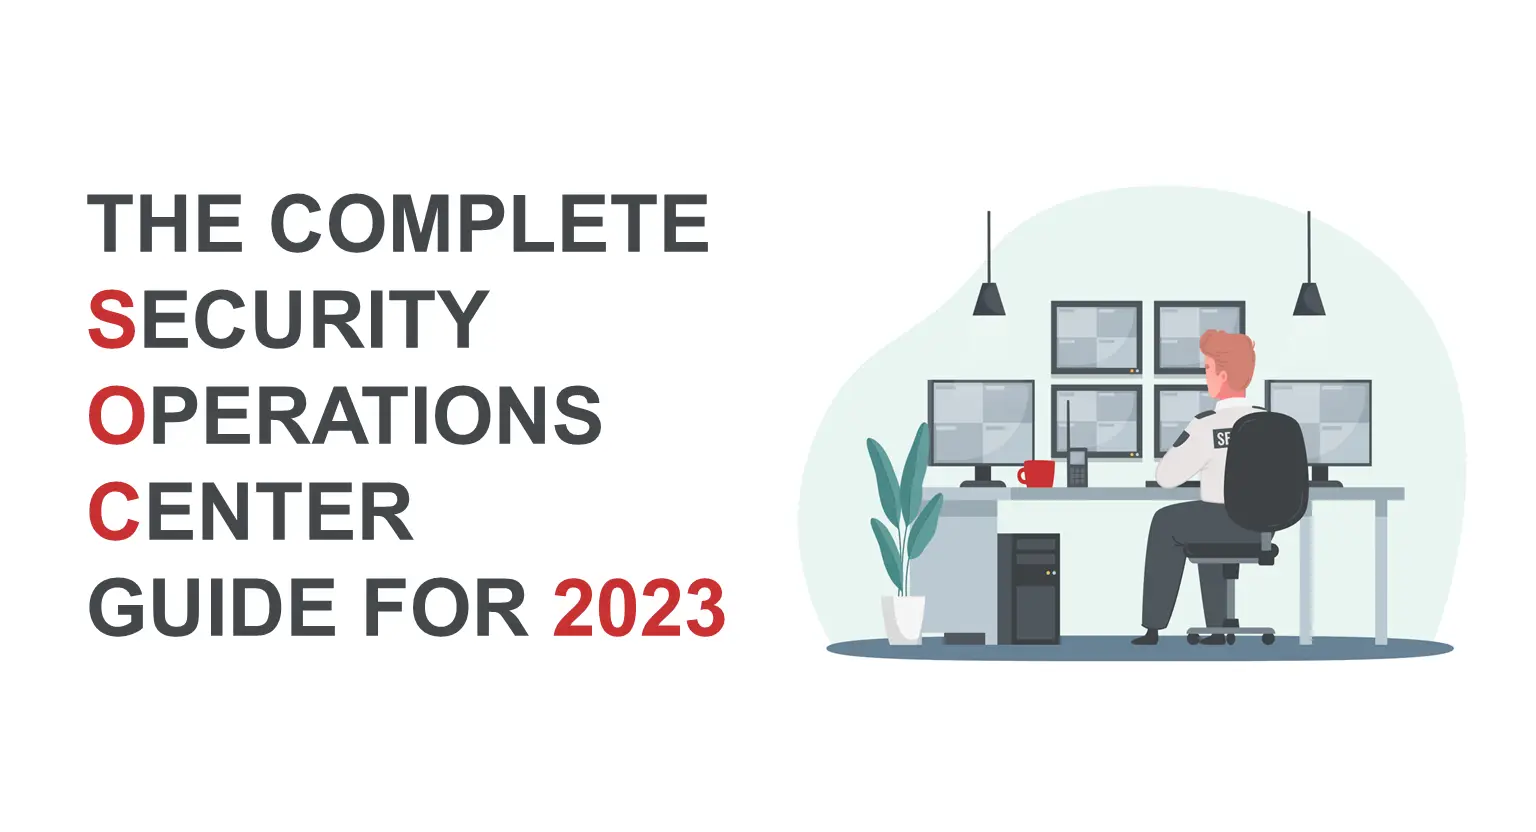 The Complete Security Operations Center Guide for 2023 